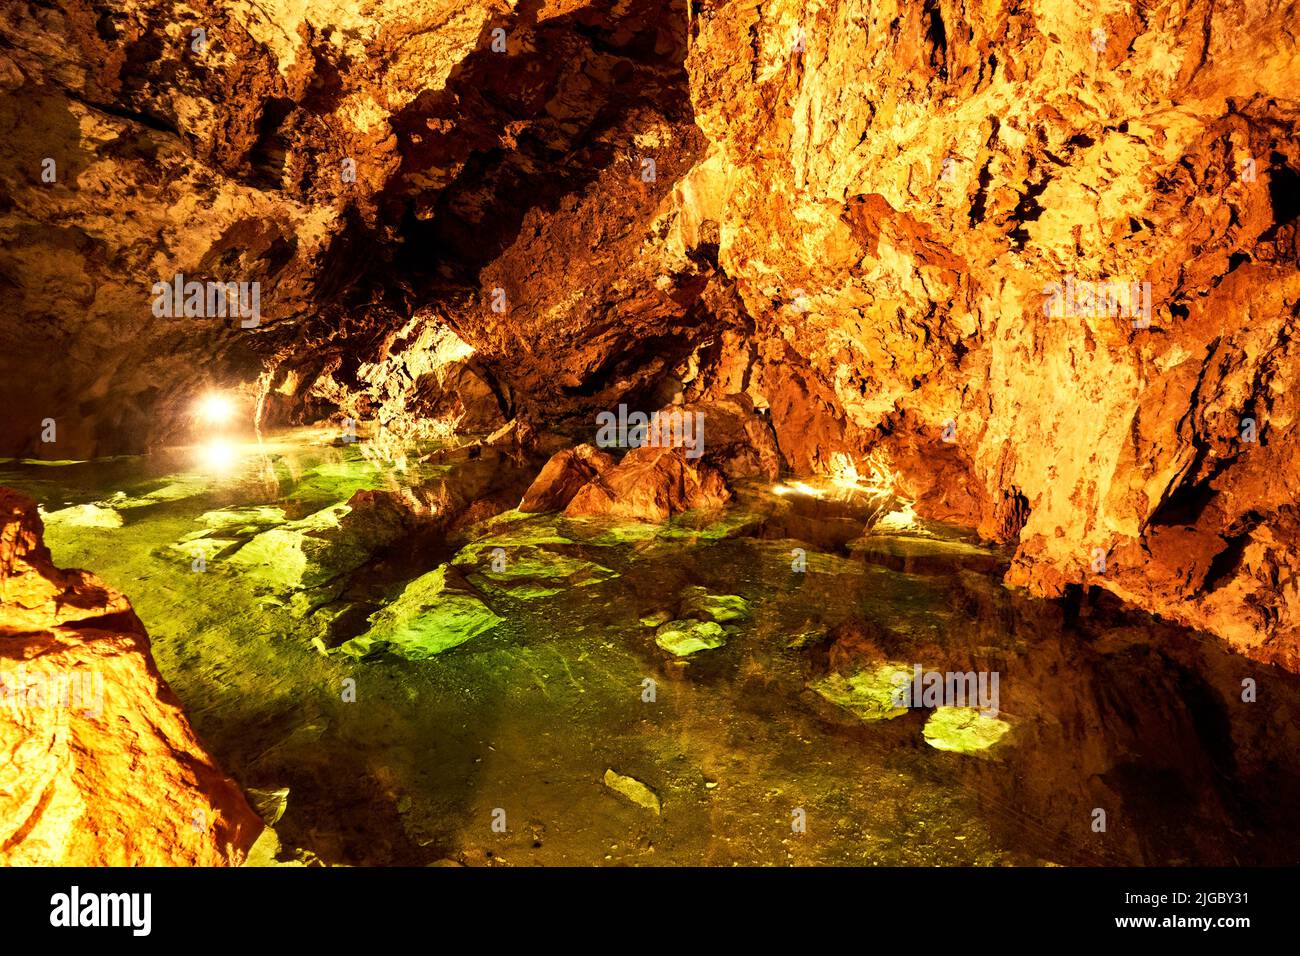 Underground lake in a cave in dolomite rock in the Giant Mountains in the Czech Republic Stock Photo